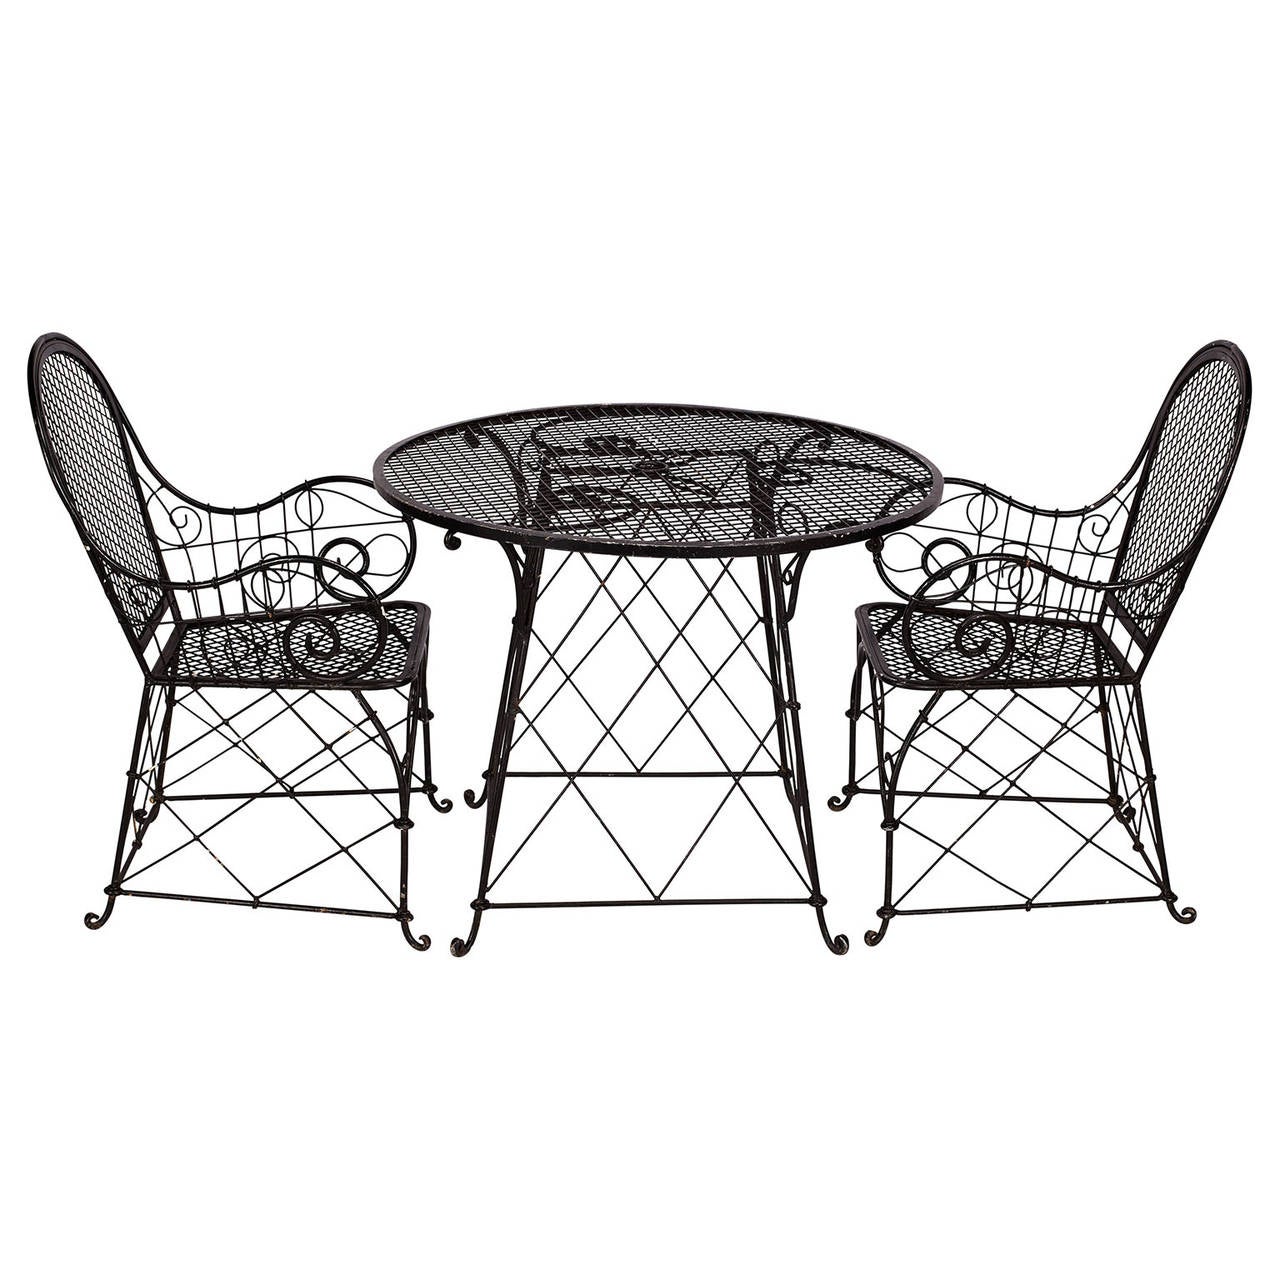 Beautiful outdoor metal and wire furniture set. Wear consitient with age and outdoor usage. Some chipping off black paint throughout.

Table: Dia: 38